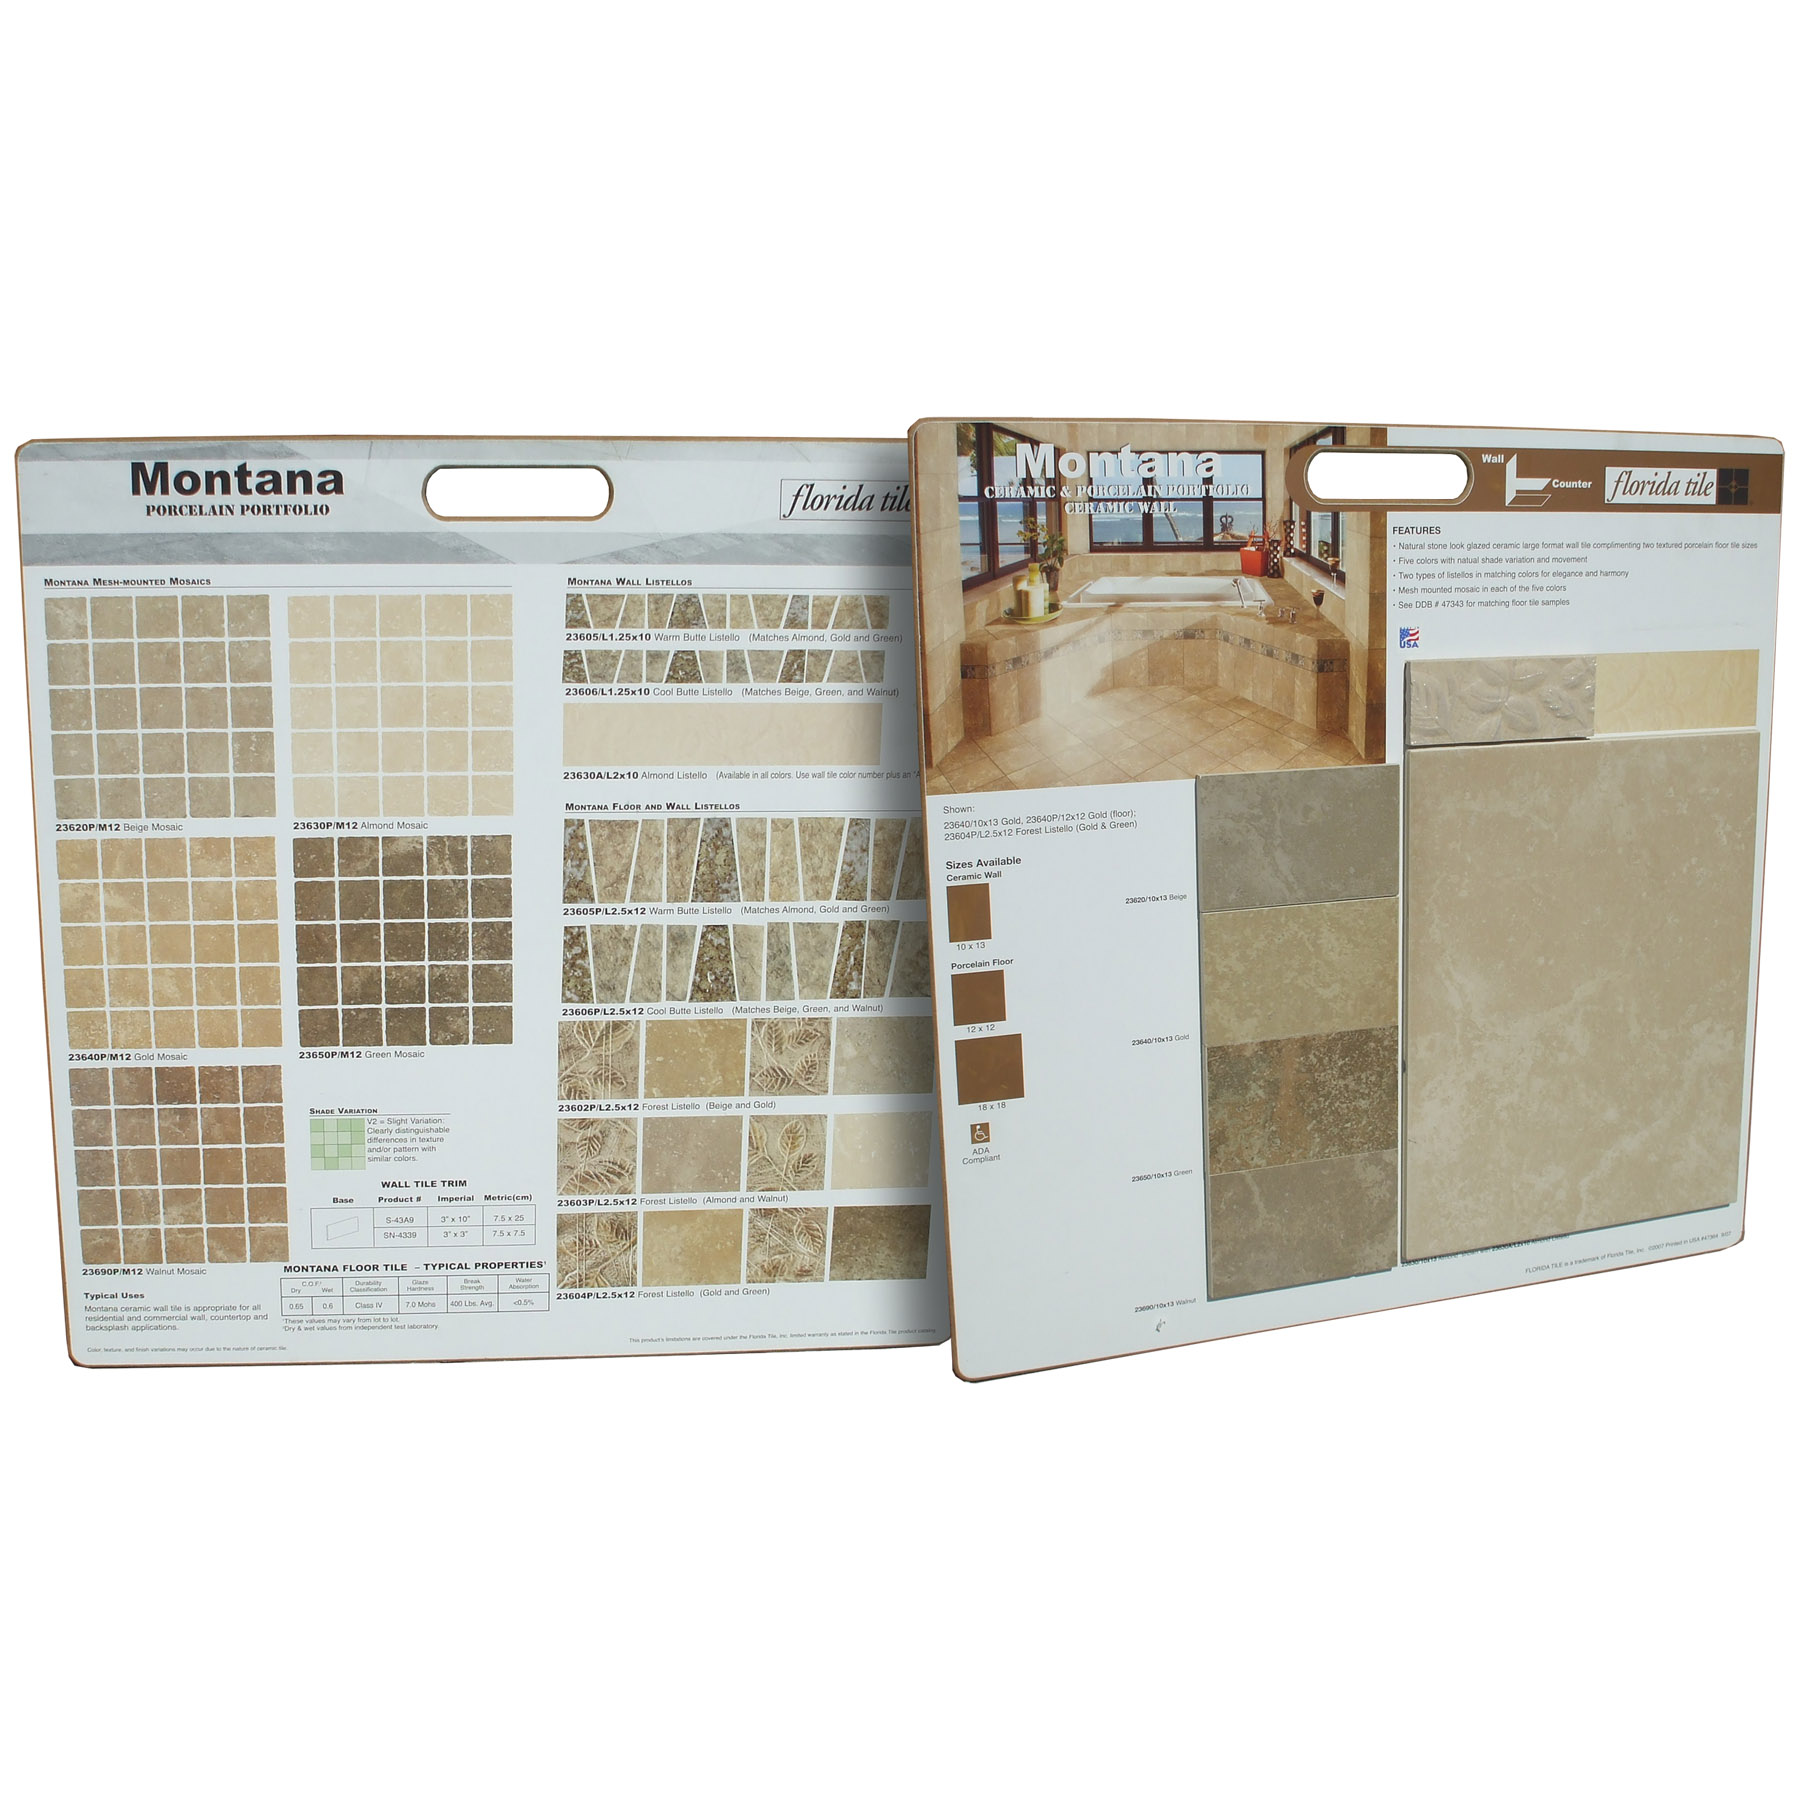 Manufactured Tile Flooring Sample Board Layout Photo Retouching Typesetting Printing Proofing